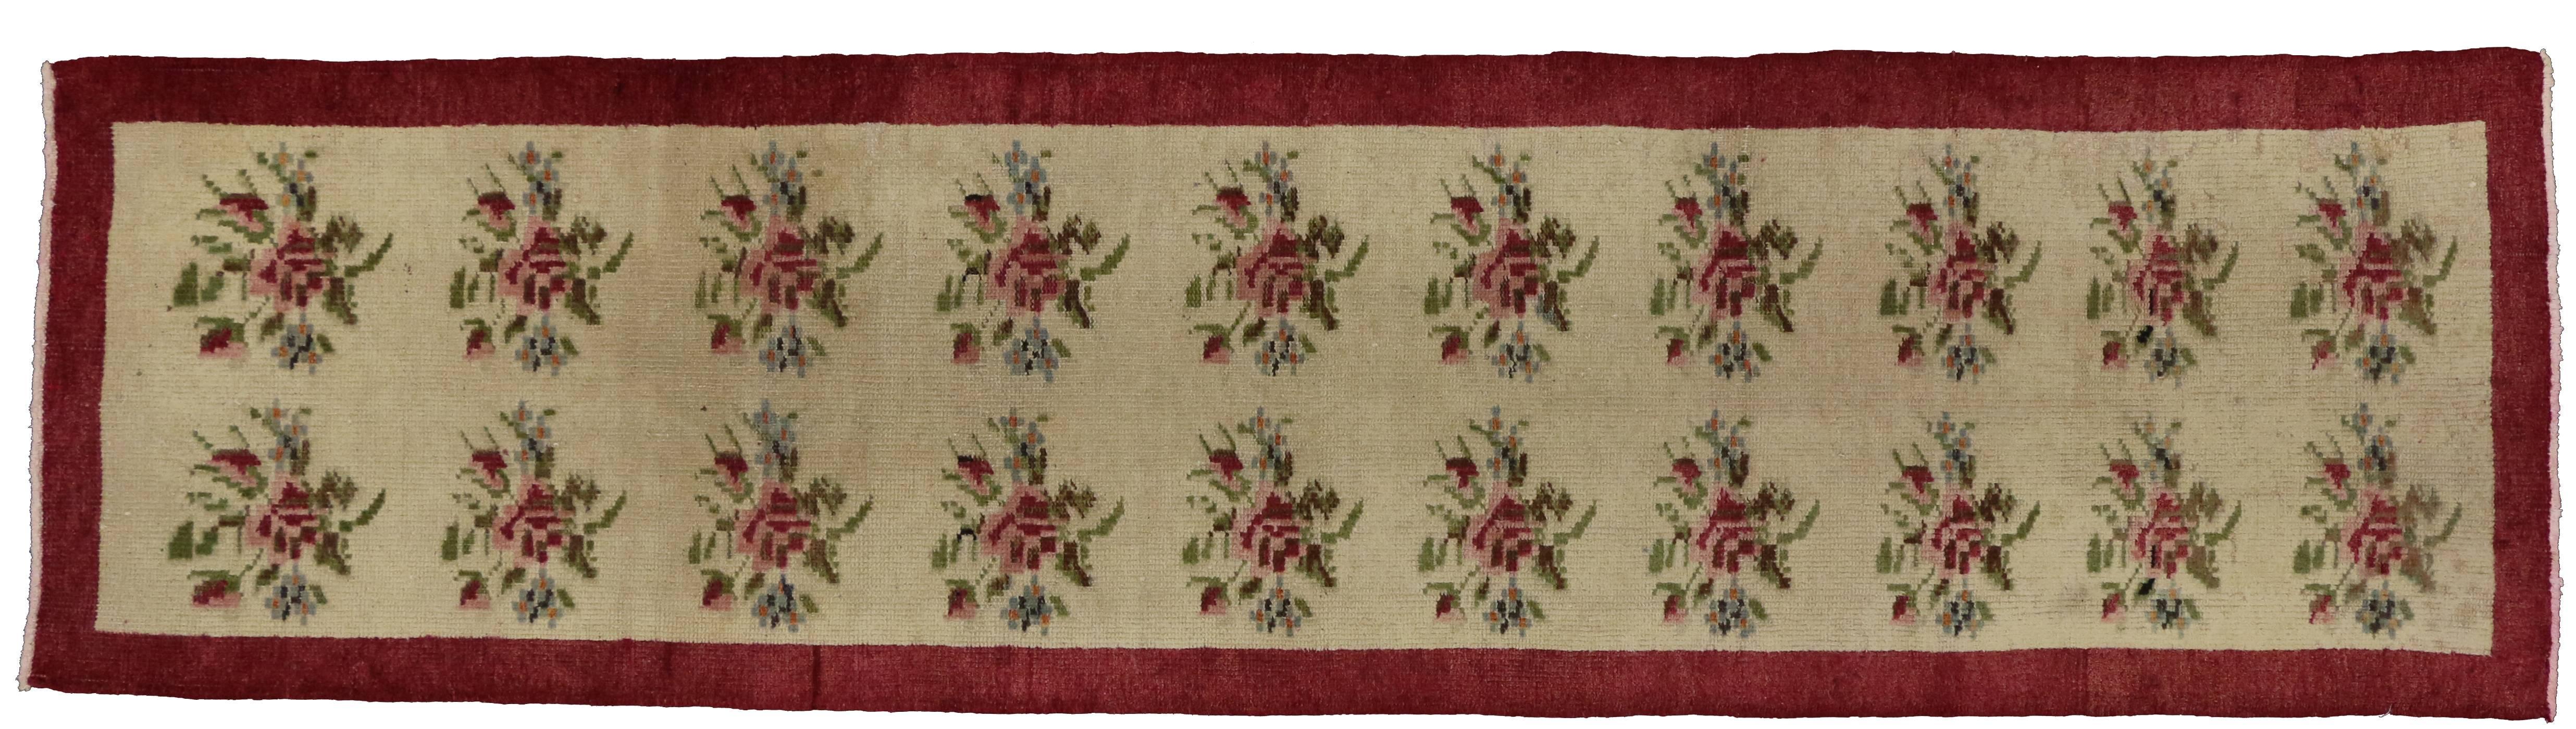 Wool Vintage Turkish Oushak Runner with Rose Bouquets, Narrow Hallway Runner For Sale